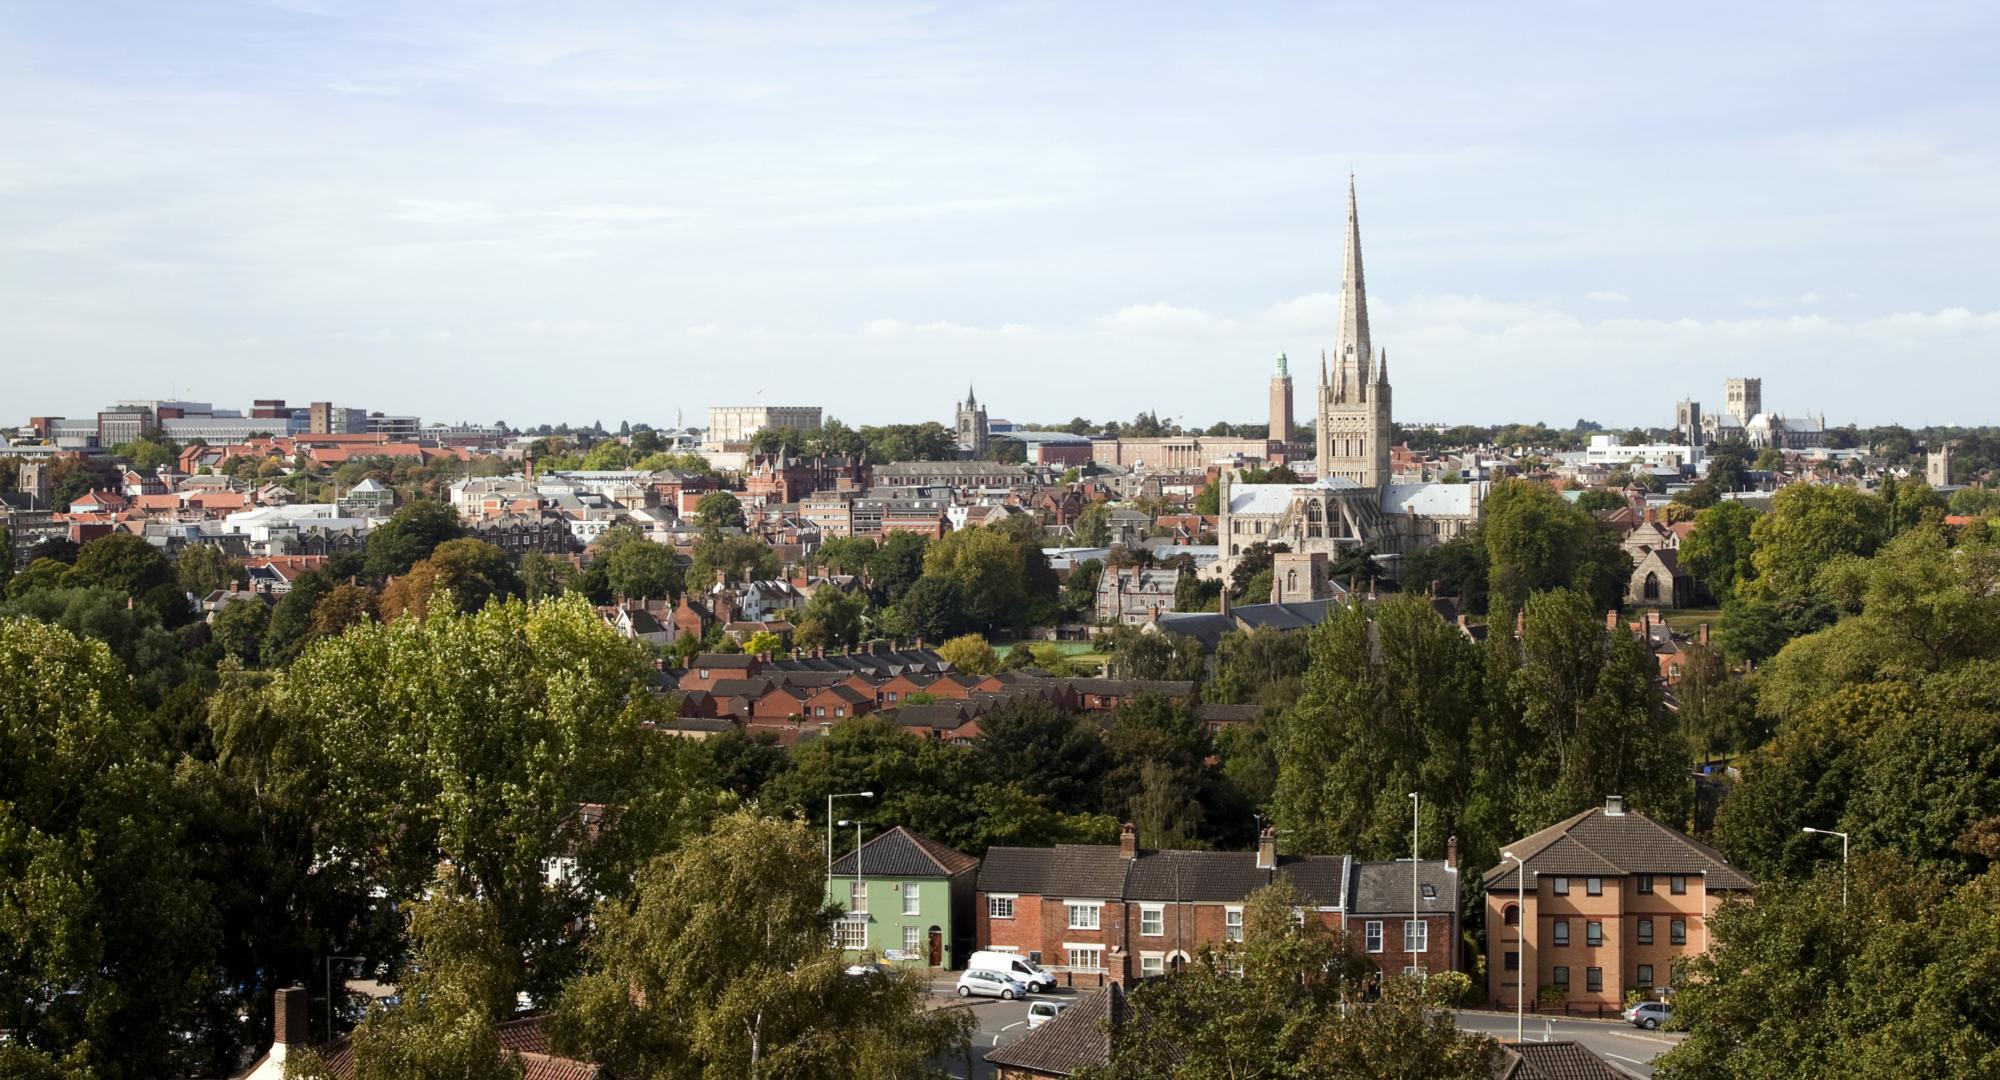 A view over the city of Norwich, in Norfolk, England